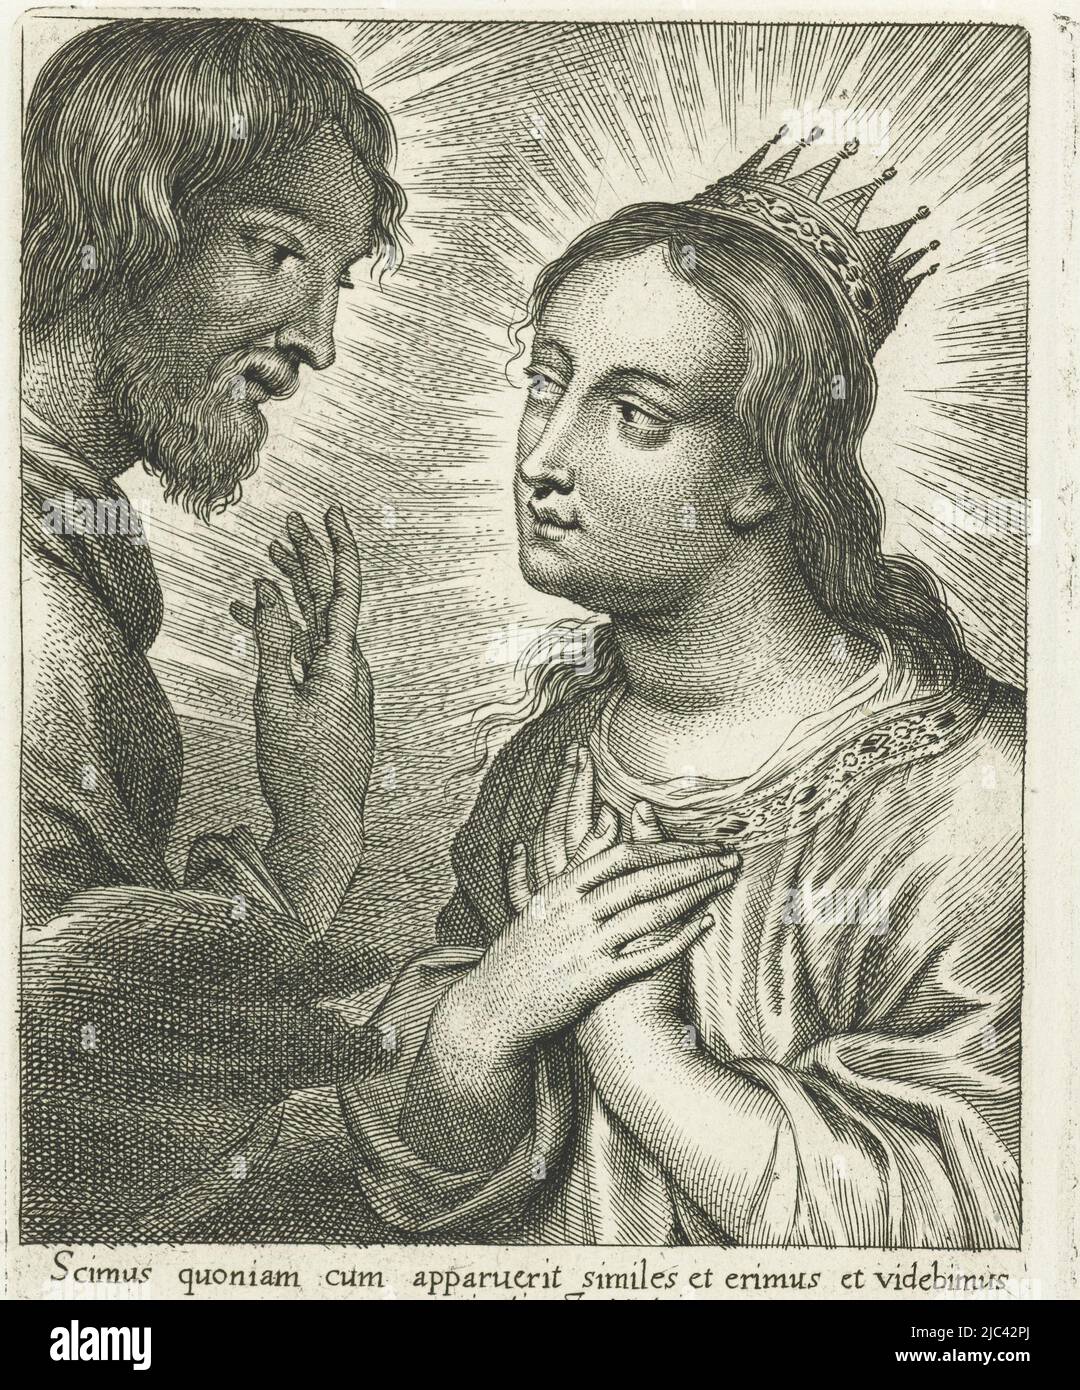 Crowned Mary and Christ. Below the scene is a Bible quotation in Latin, Dutch and French from John 1, verse 3., Crowned Mary and Christ V, print maker: Schelte Adamsz. Bolswert, Peter Paul Rubens, publisher: Cornelis Galle (II), (mentioned on object), 1596 - 1678, paper, engraving, h 130 mm × w 88 mm Stock Photo